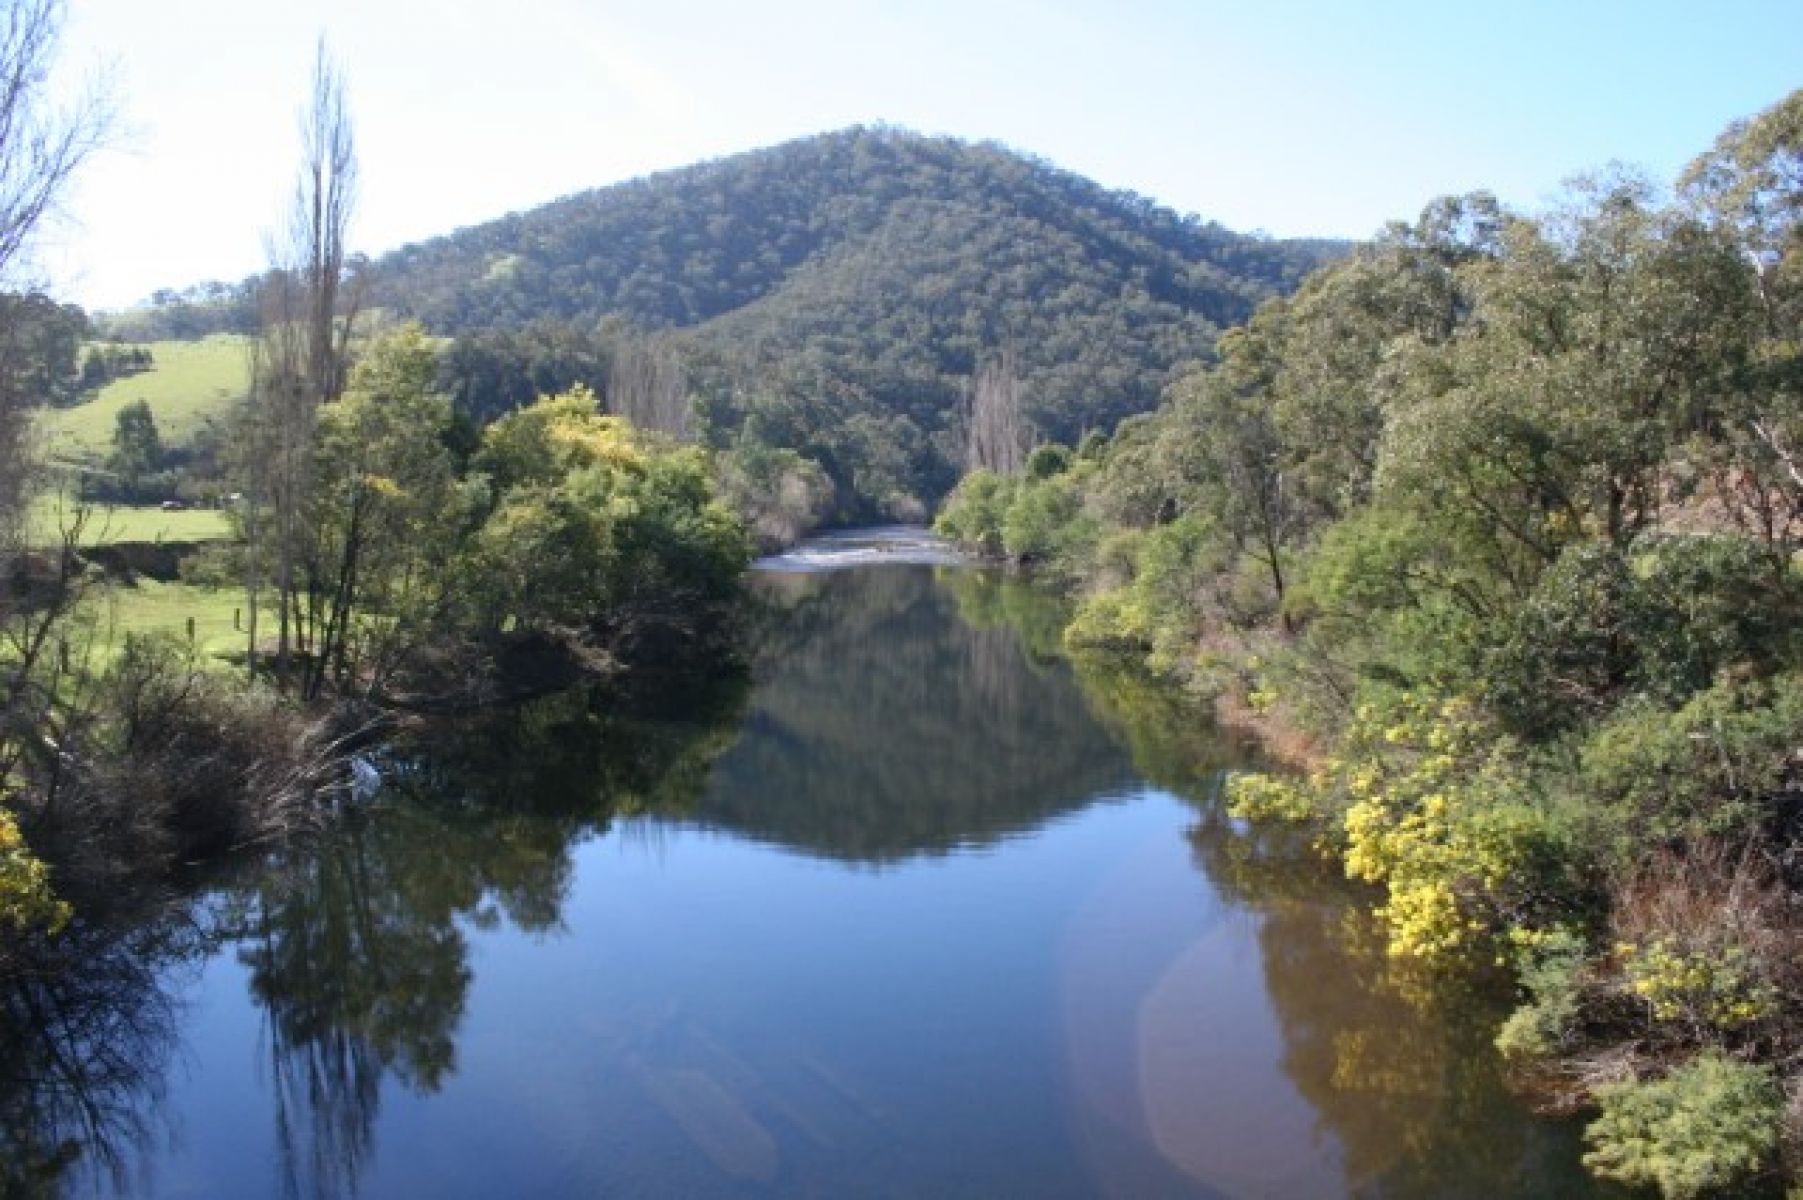 The Mitchell River has willow trees lining it on each side. A mountain in the background is covered in trees. Some wattle trees are also visible. 